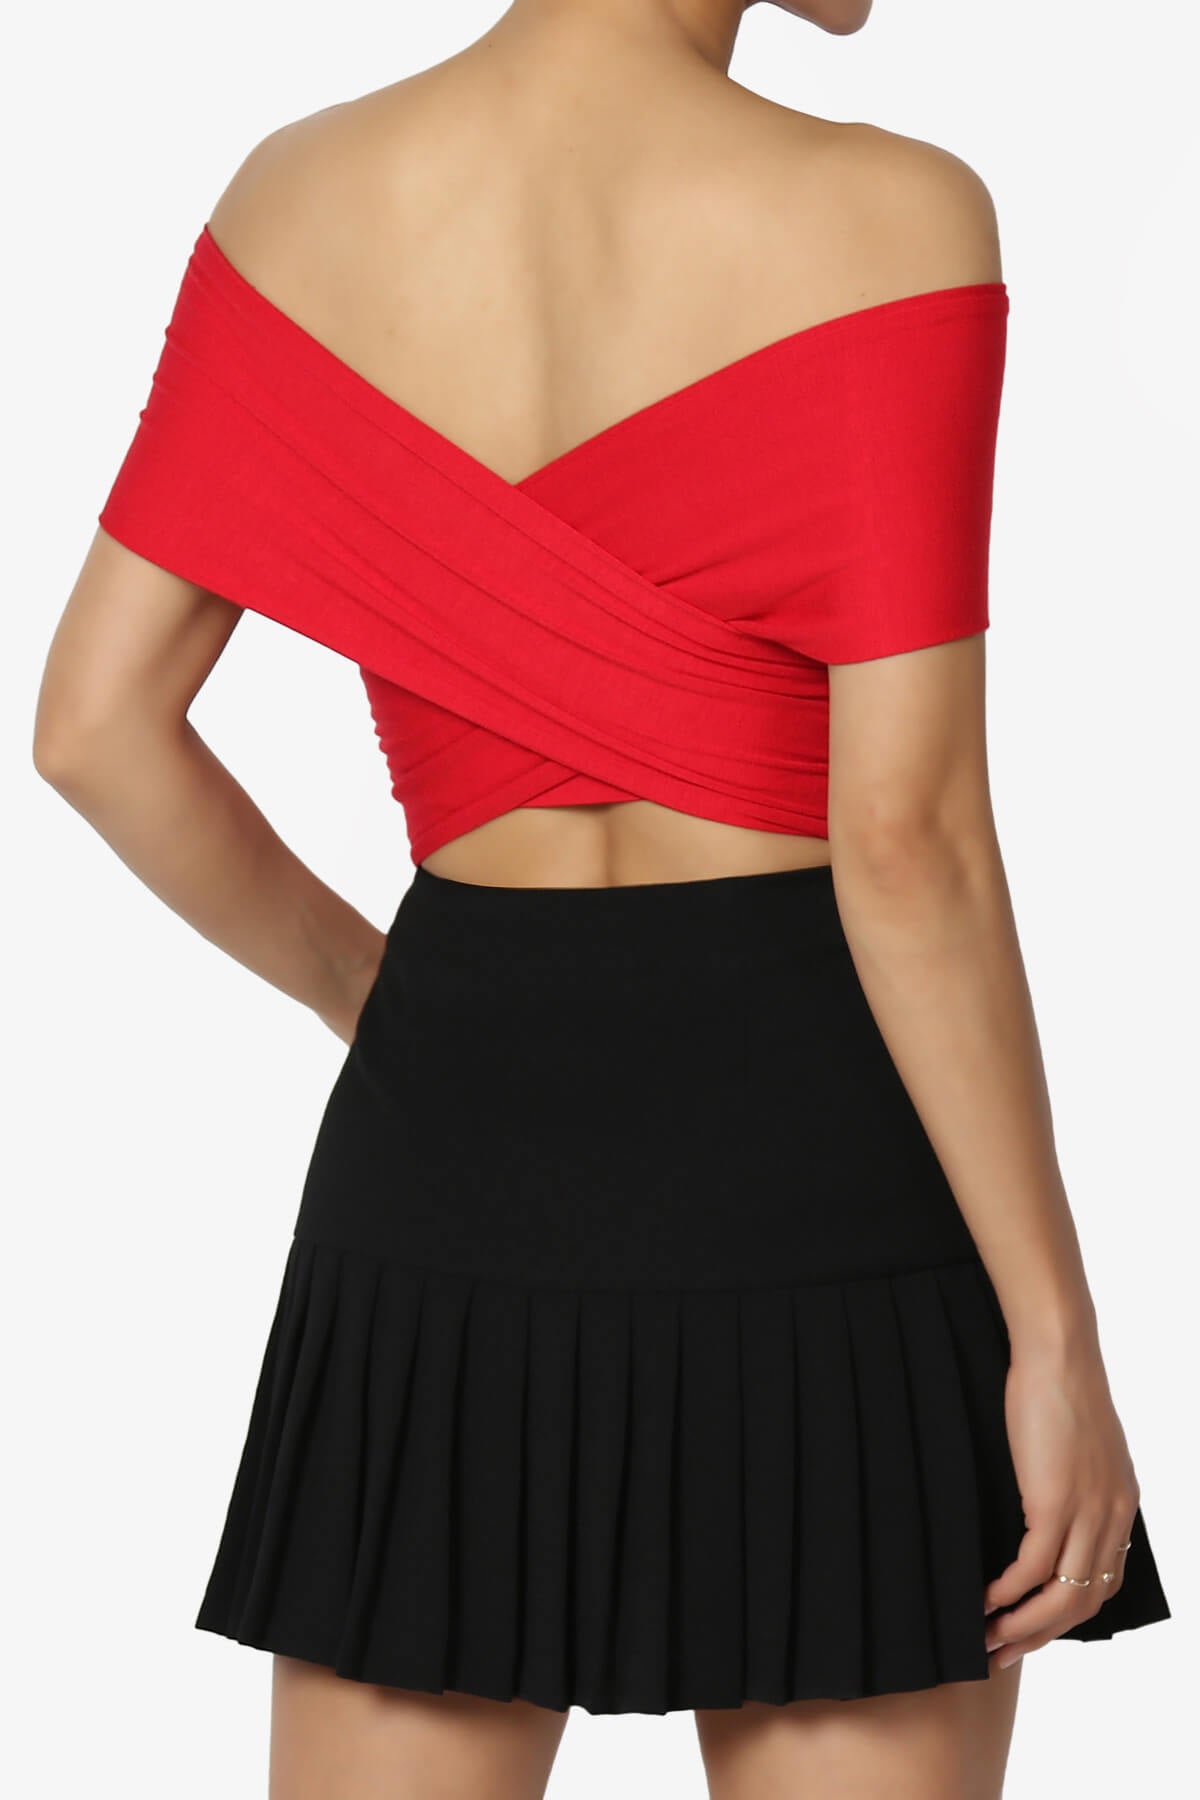 Clementine Multi Way Scarf Wrap Crop Top RED_2